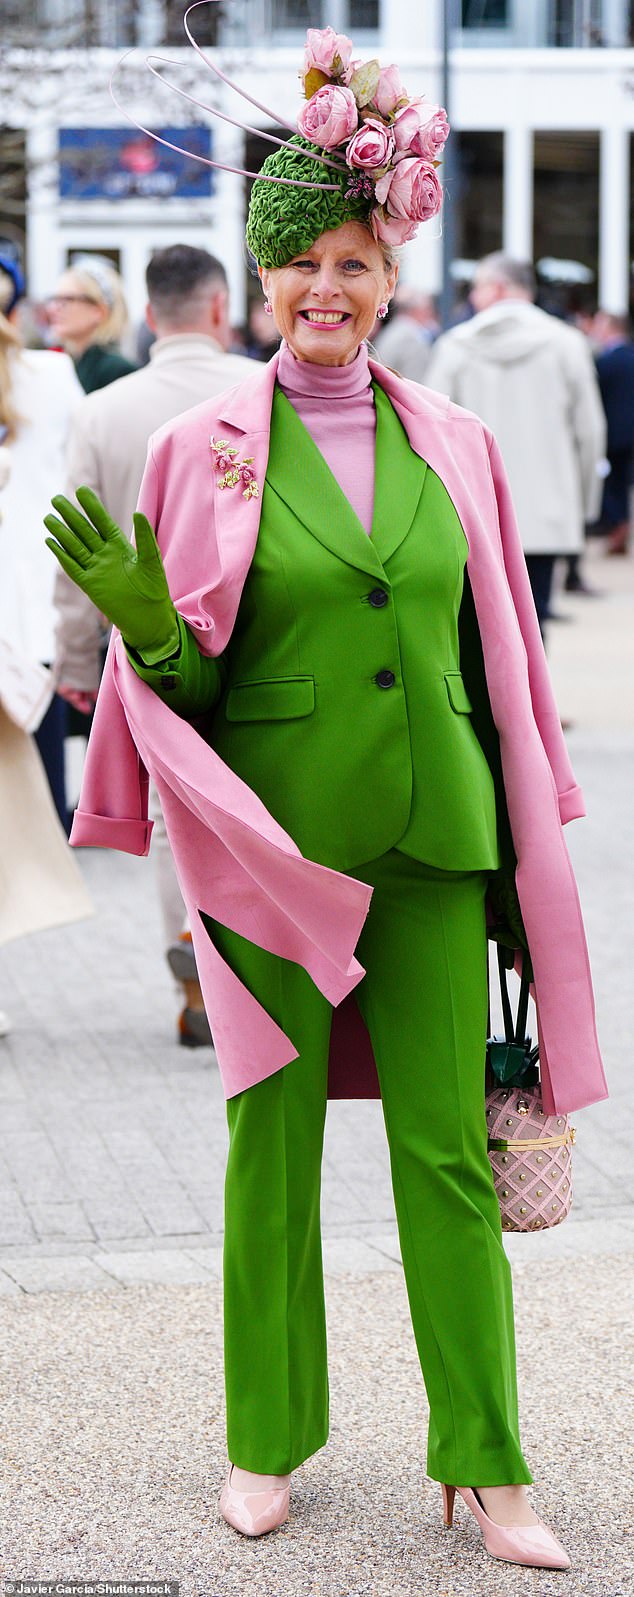 It's easy to be green!  One reveler stood out in signature style by teaming his green suit with a pink coat and accessories